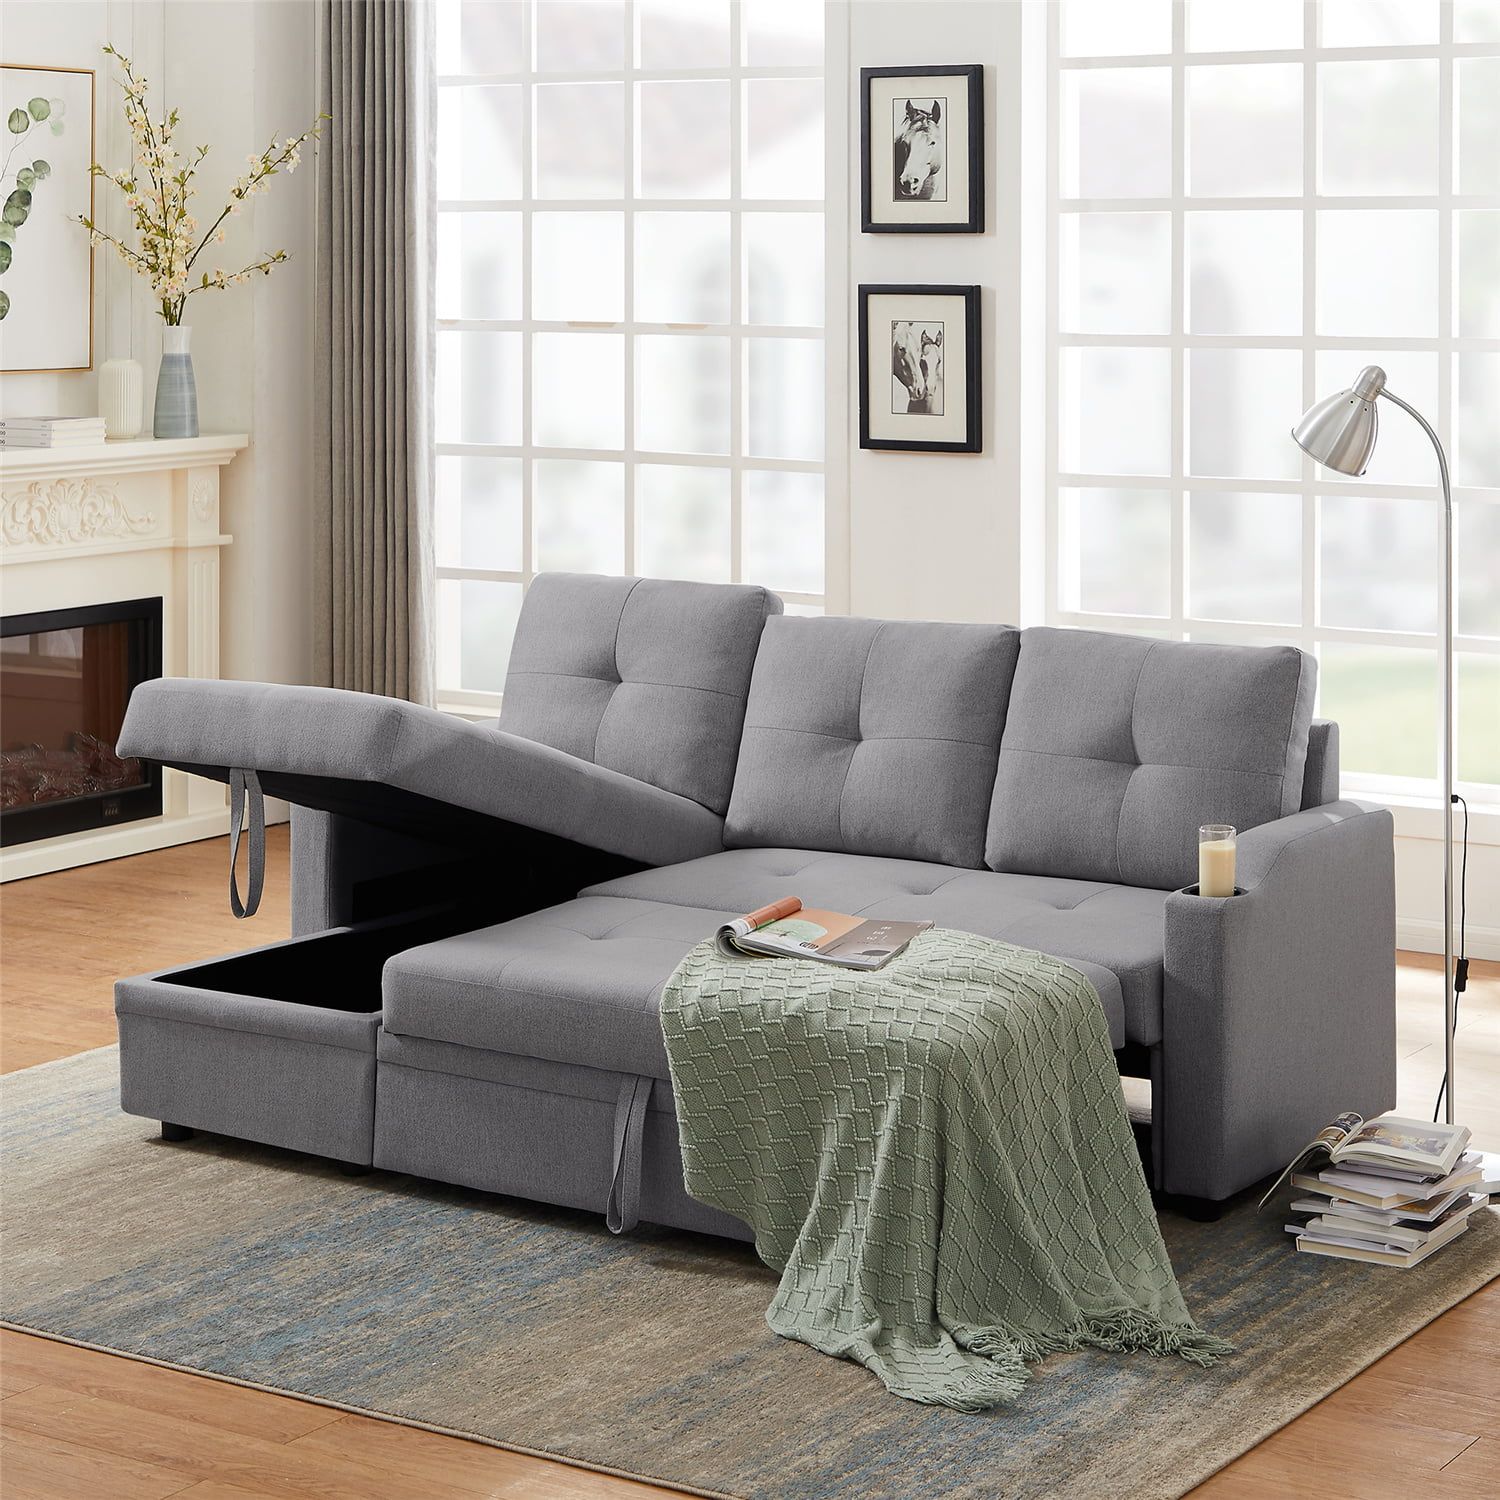 81" Sleeper Sectional Sofa Couch With Pull Out Sleeper And Reversible  Storage Chaise Lounge, Convertible Corner Sofa Couch With Two Cup Holders  For Living Room, Gray – Walmart Regarding Sectional Sofa With Storage (View 6 of 15)